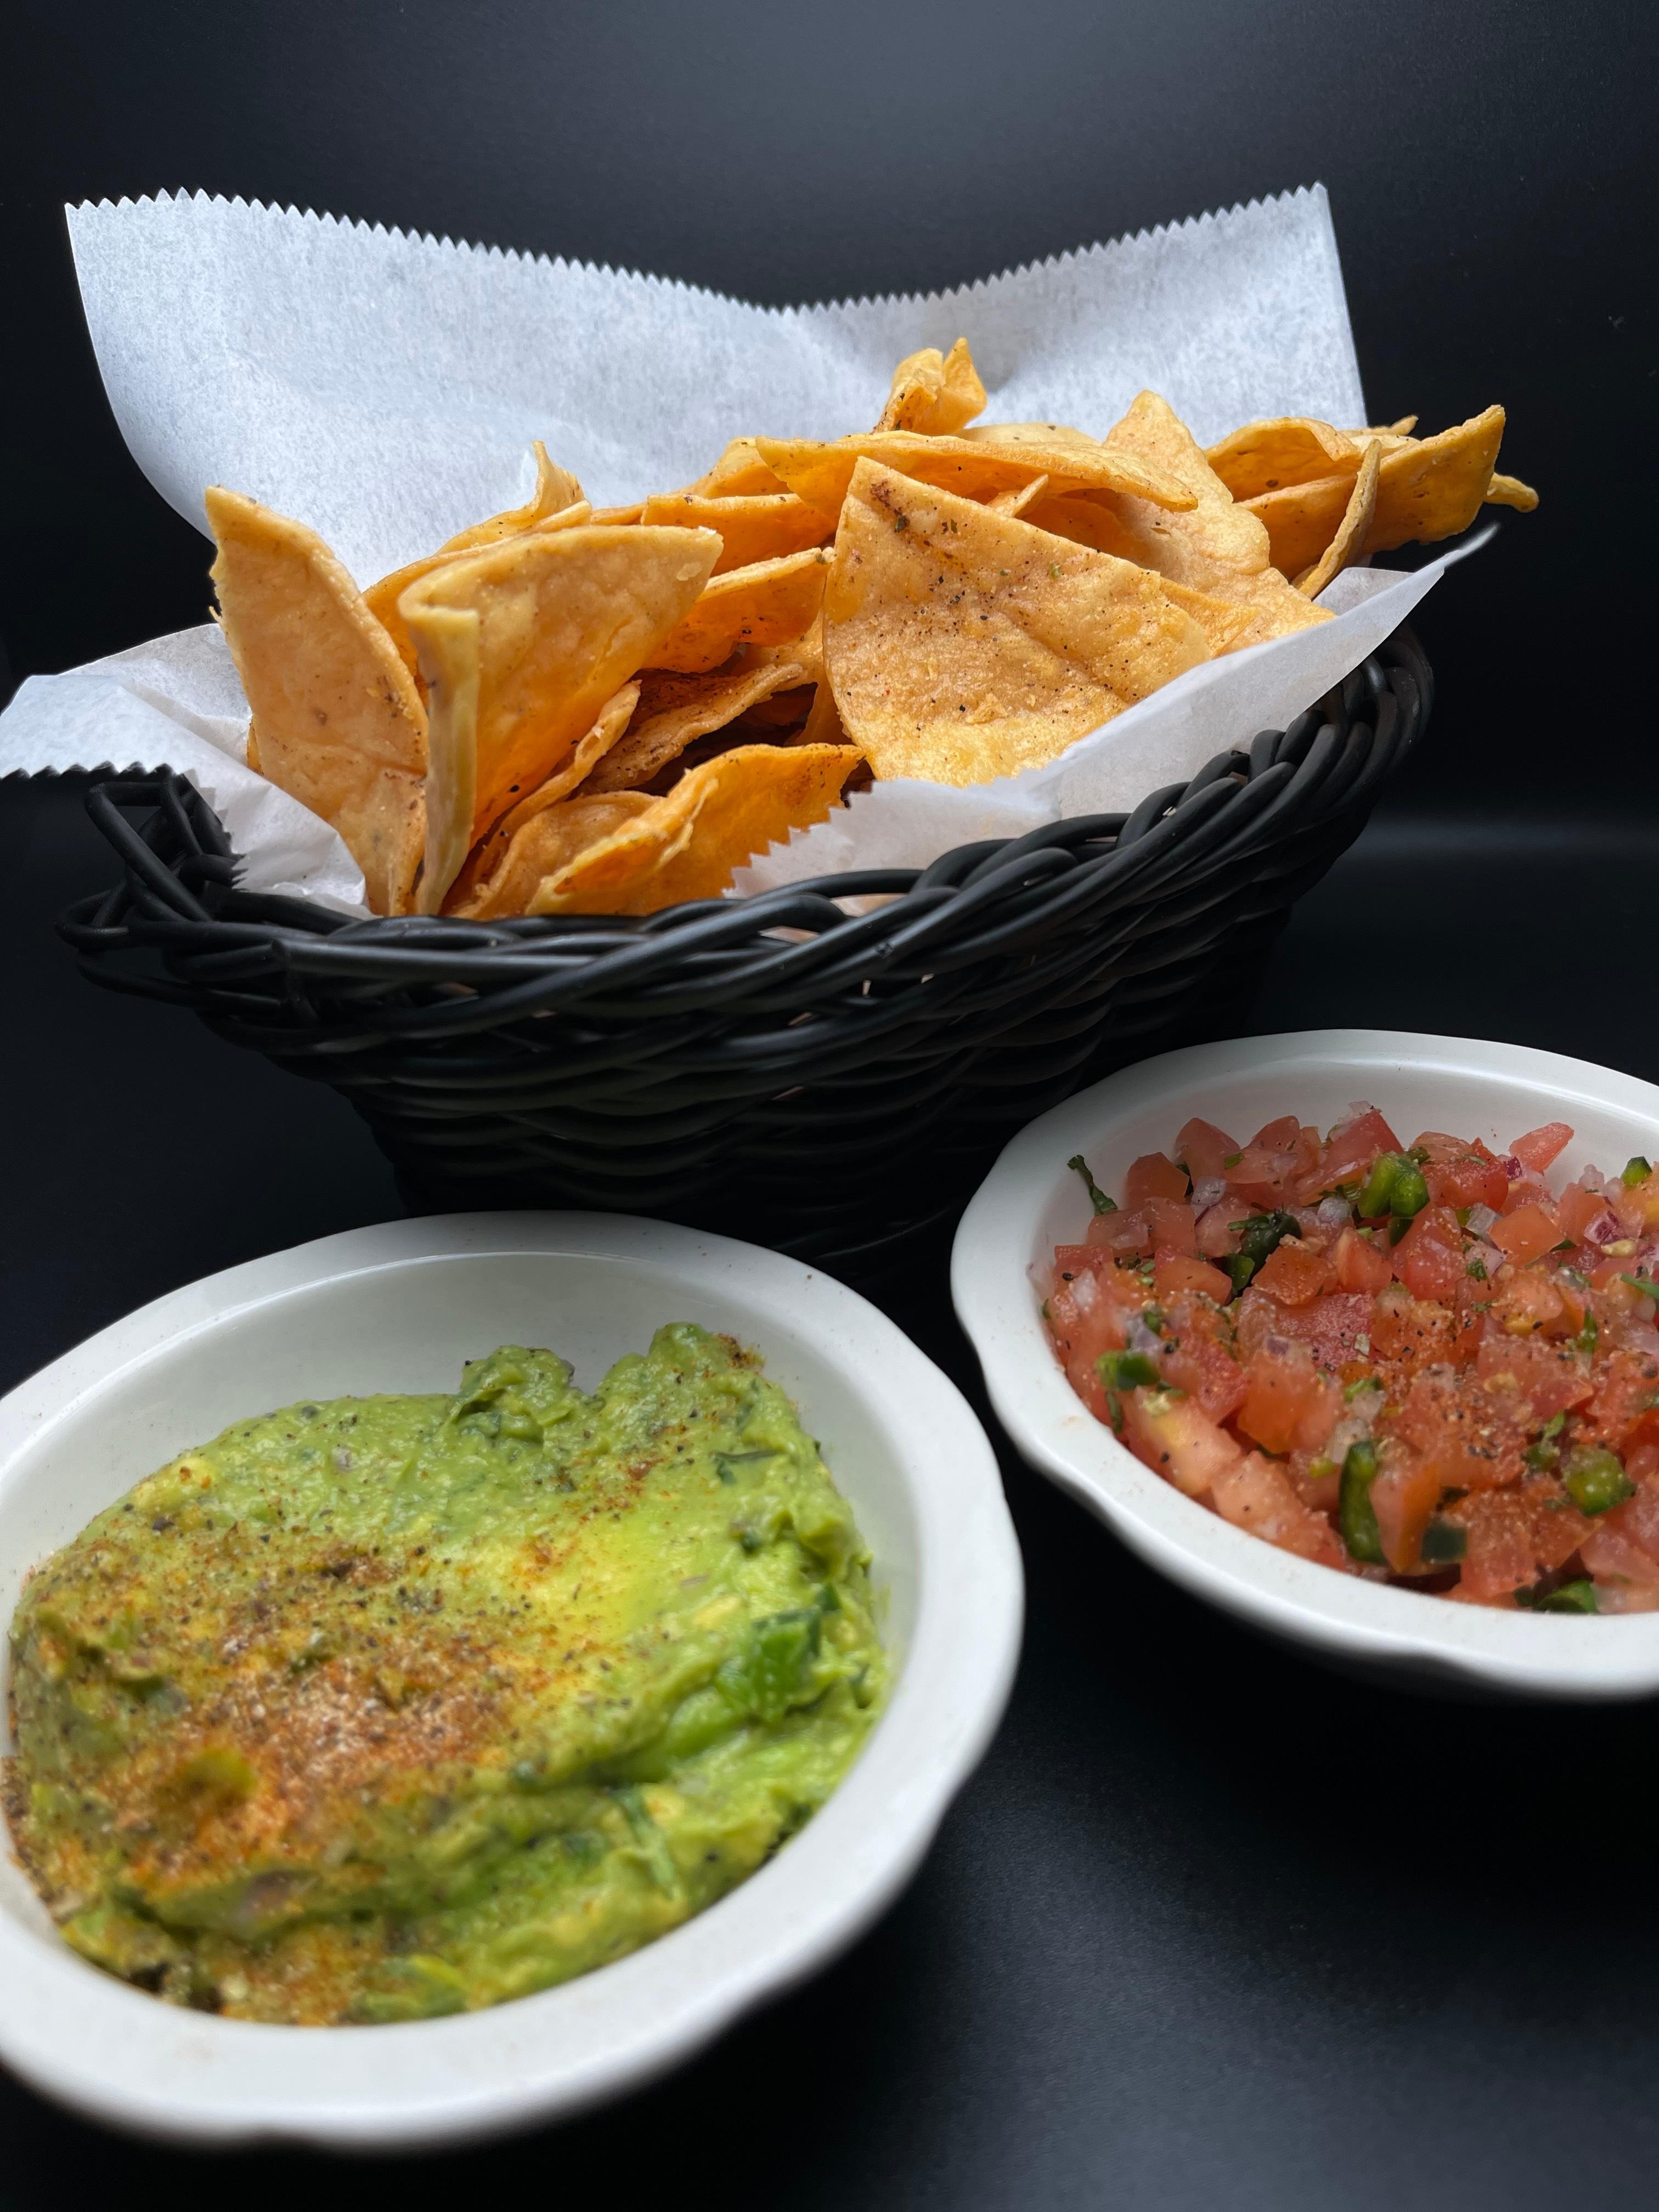 CHIPS, SALSA AND GUACAMOLE